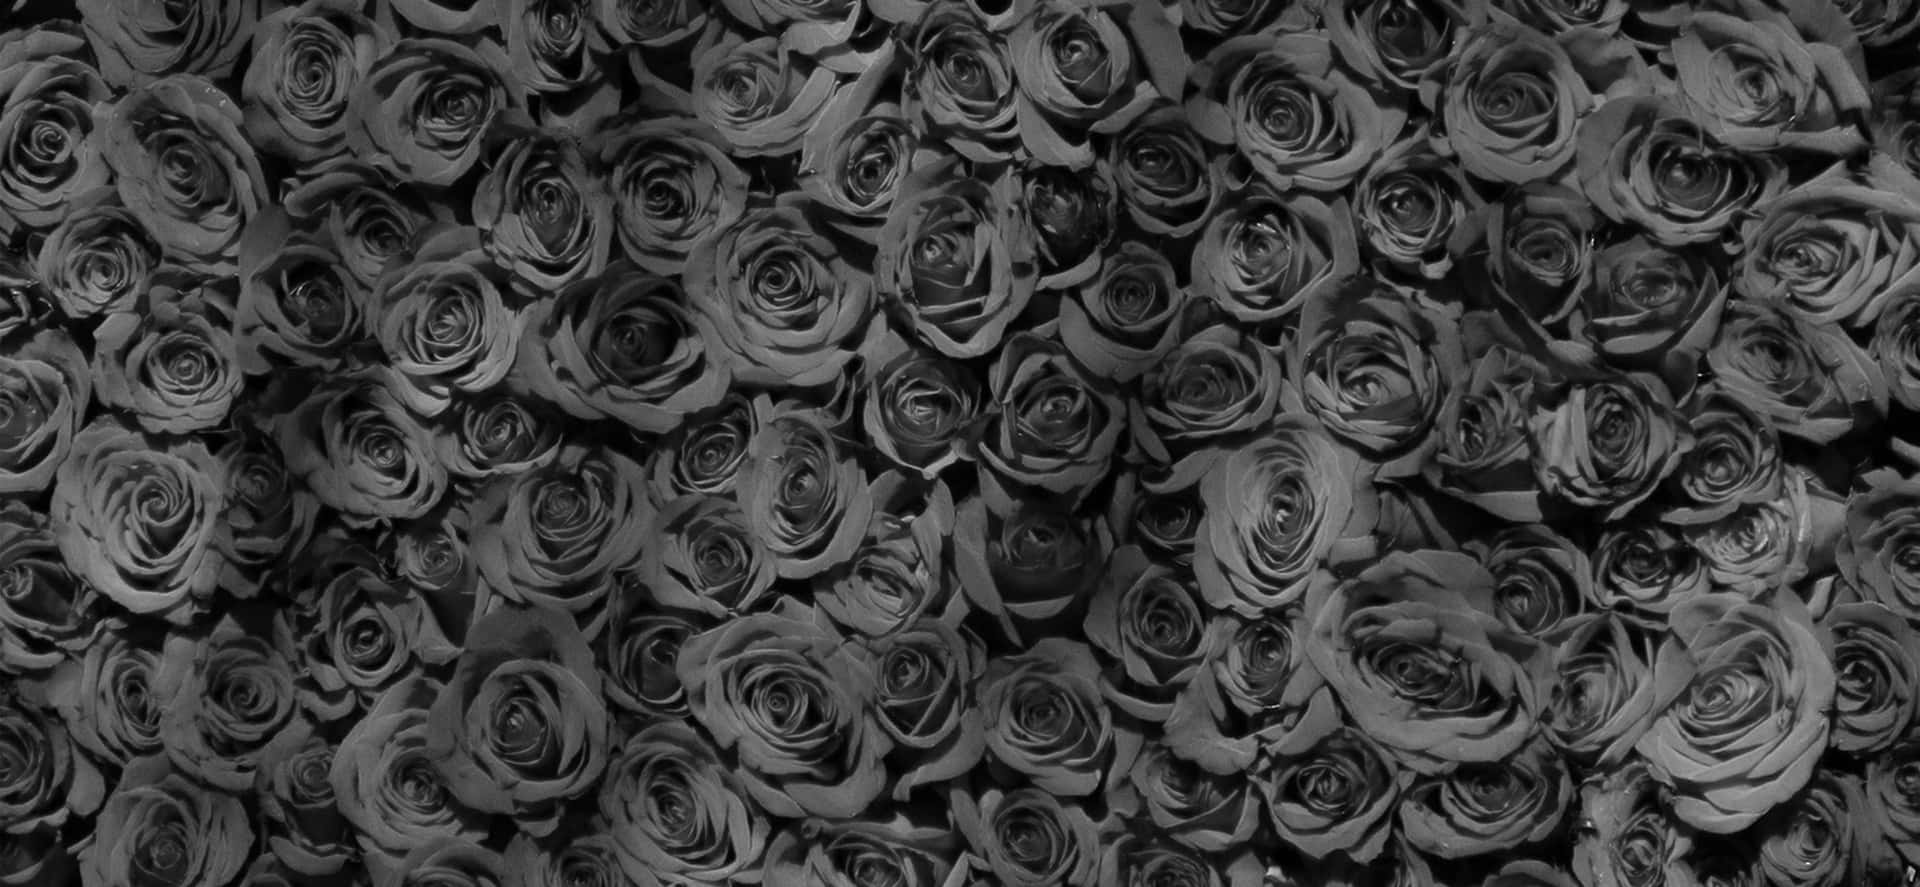 "The mysterious beauty of the black rose"